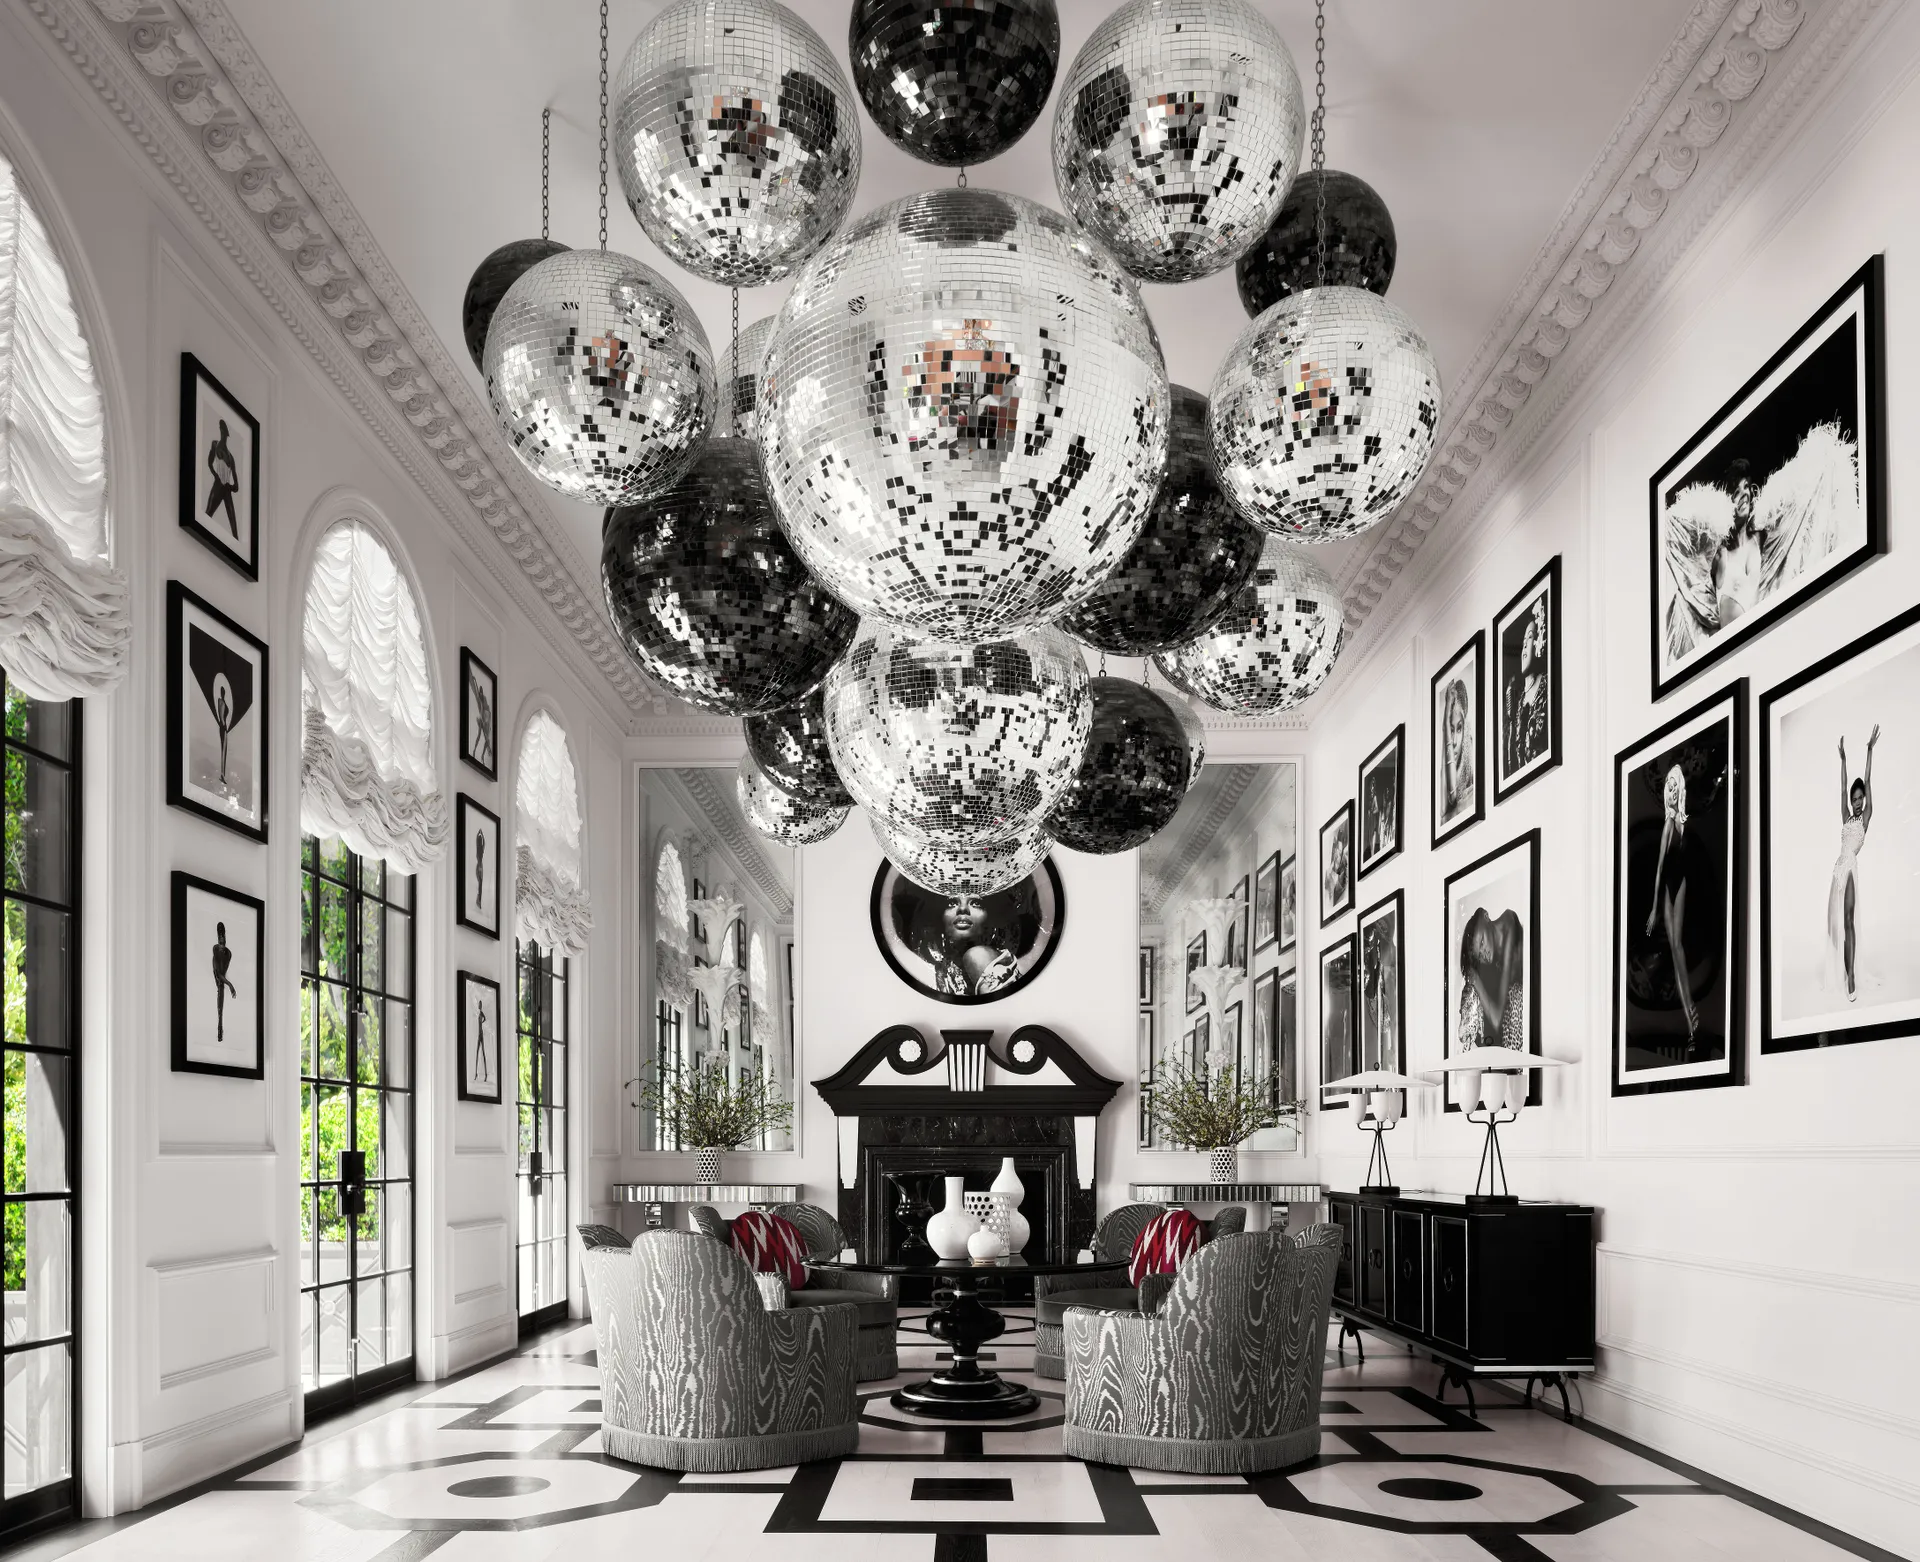 RuPauls black and white room designed by Martyn Lawrence Bullard